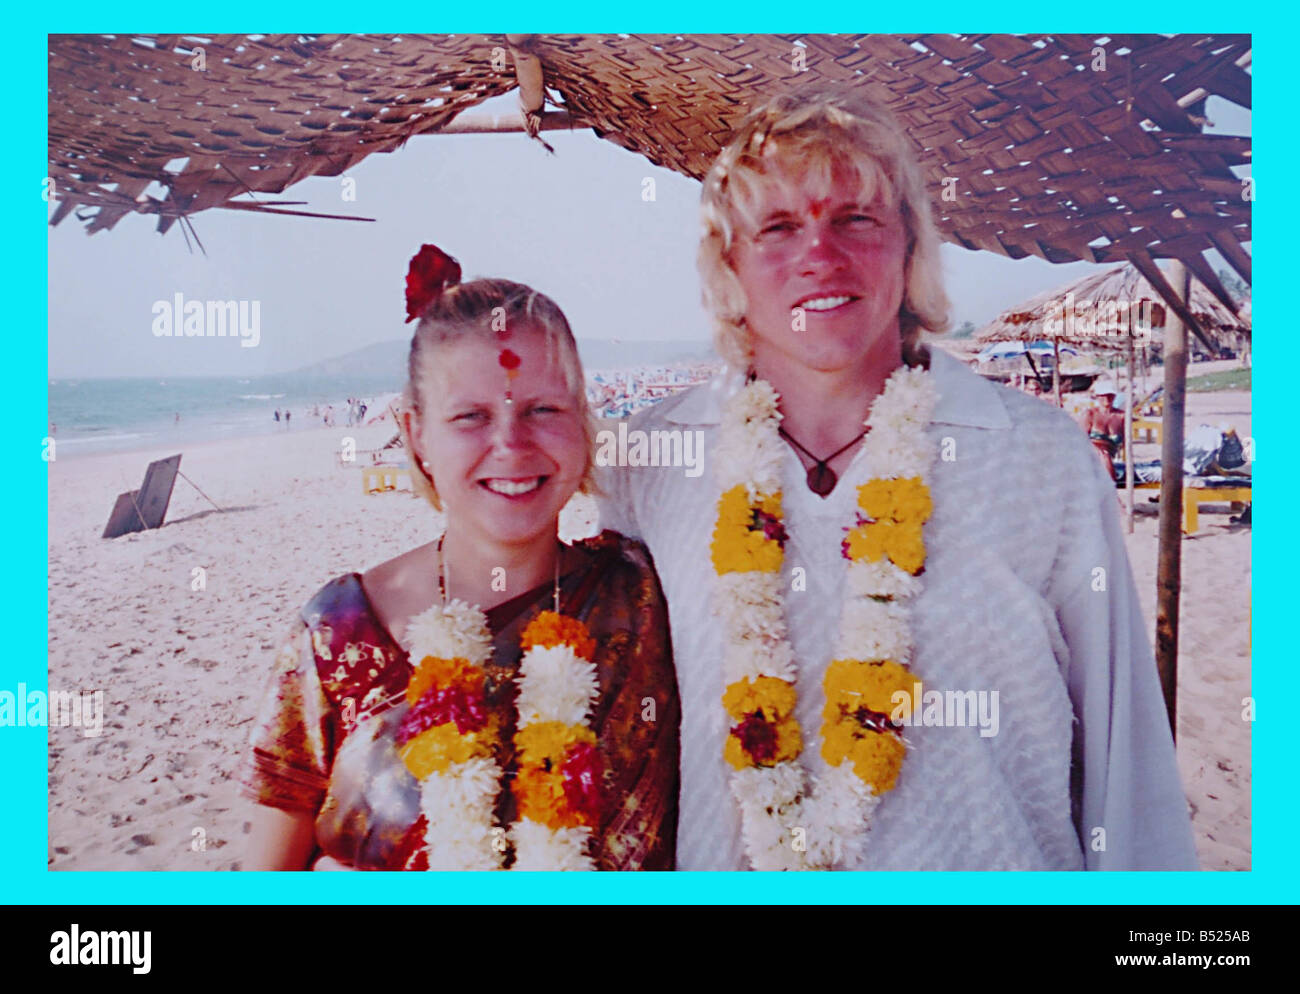 TONY 42 AND LARISA 22 CAPLIN HAVE MARRIED EACH OTHER 3 TIMES THEY MARRIED IN NOV 2005 COLLECTS OF THE SECOND WEDDING IN GOA INDIA A HINDU WEDDING 12 JAN 2006 Stock Photo